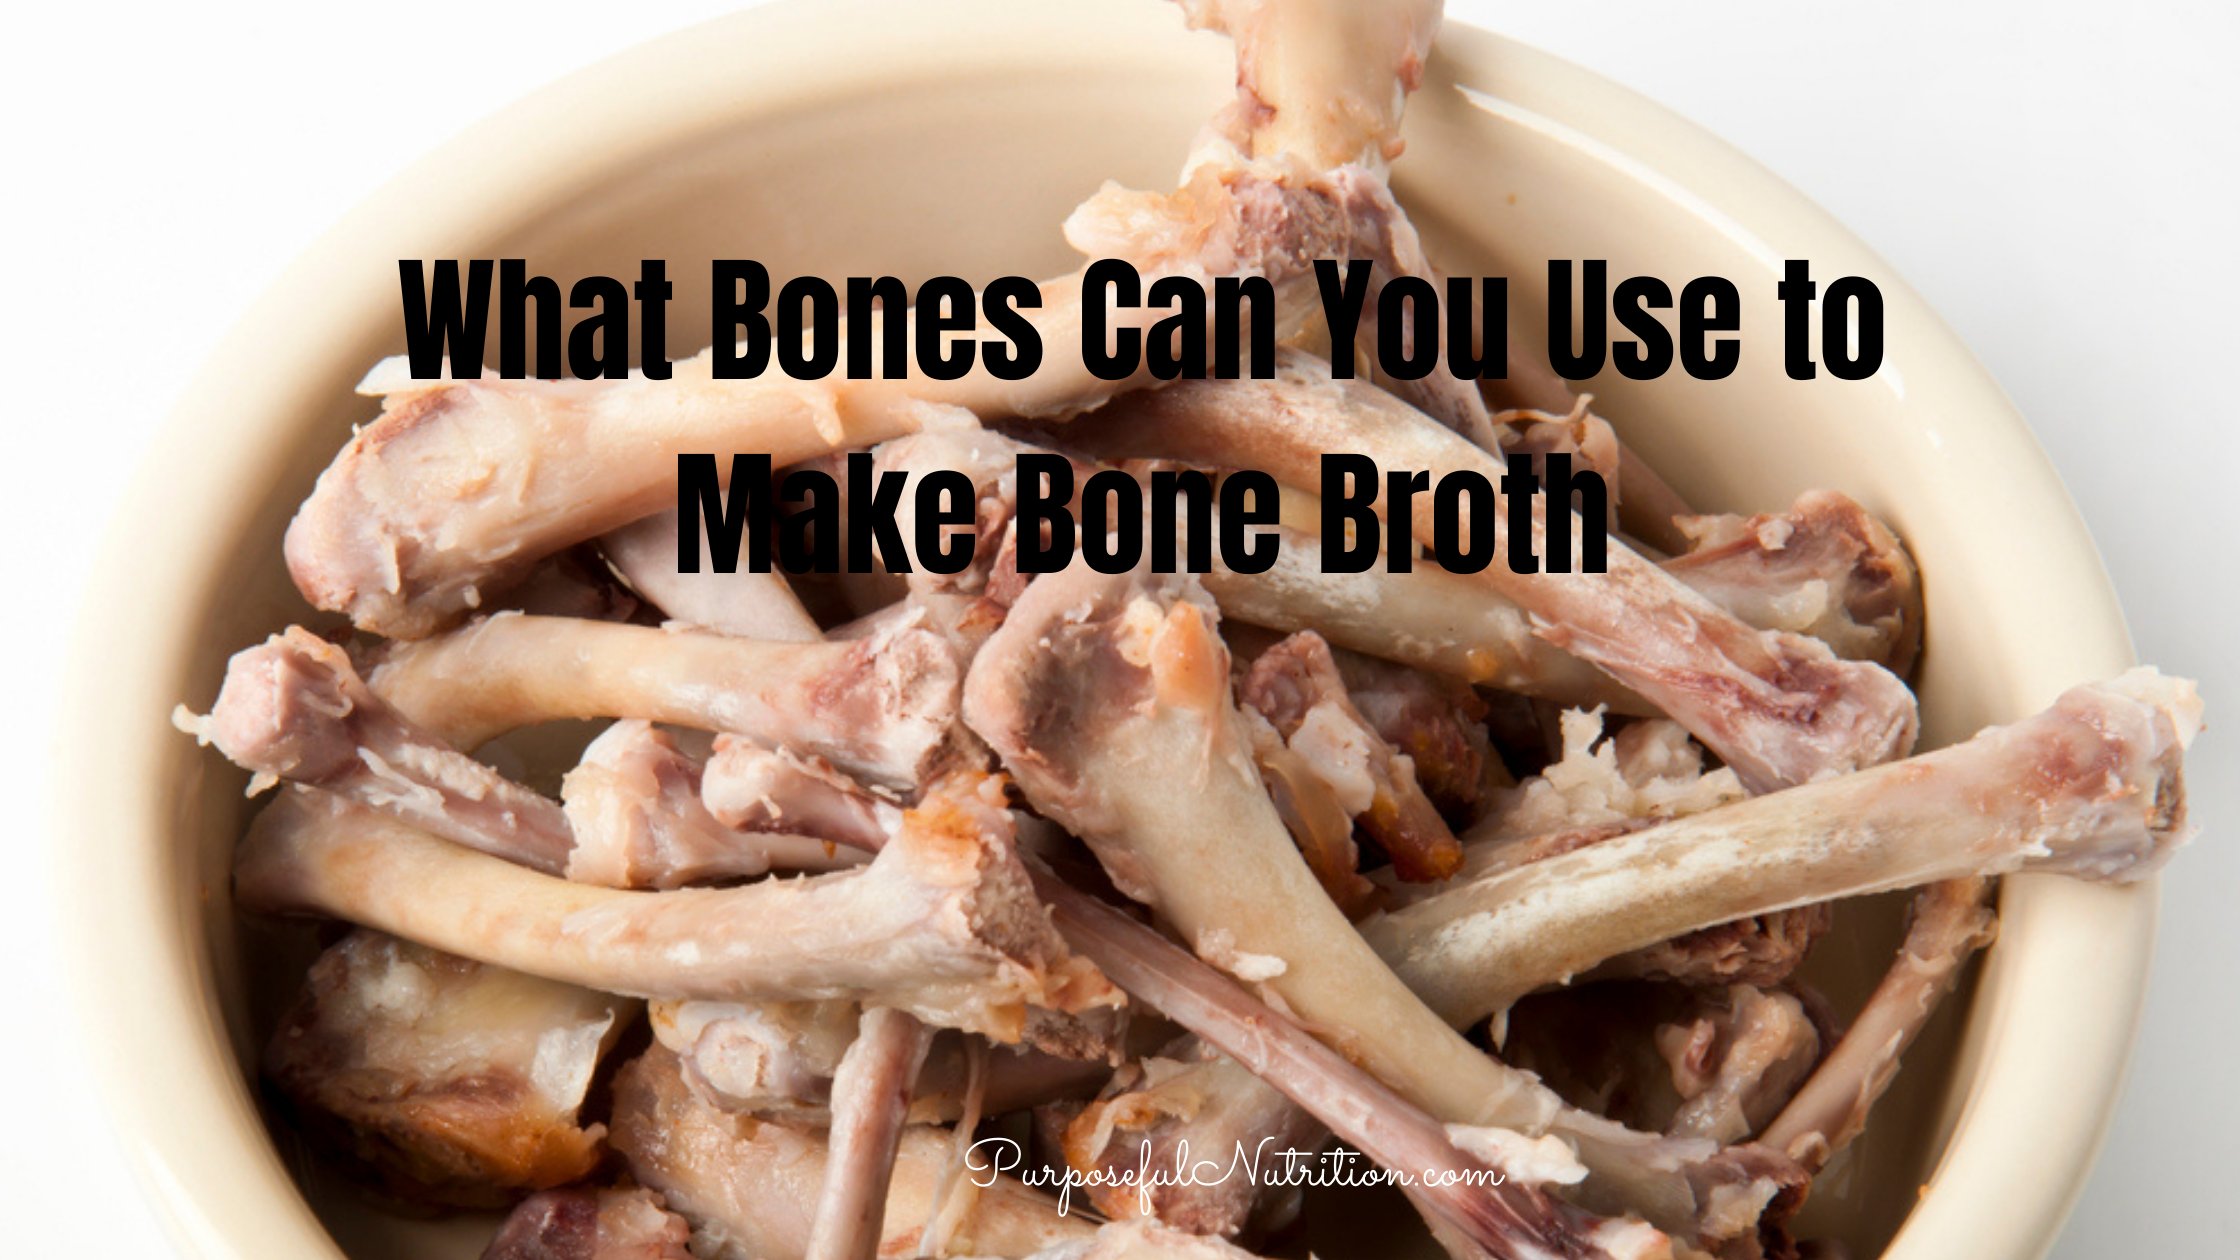 What Bones Can You Use To Make Bone Broth? - Purposeful Nutrition ...